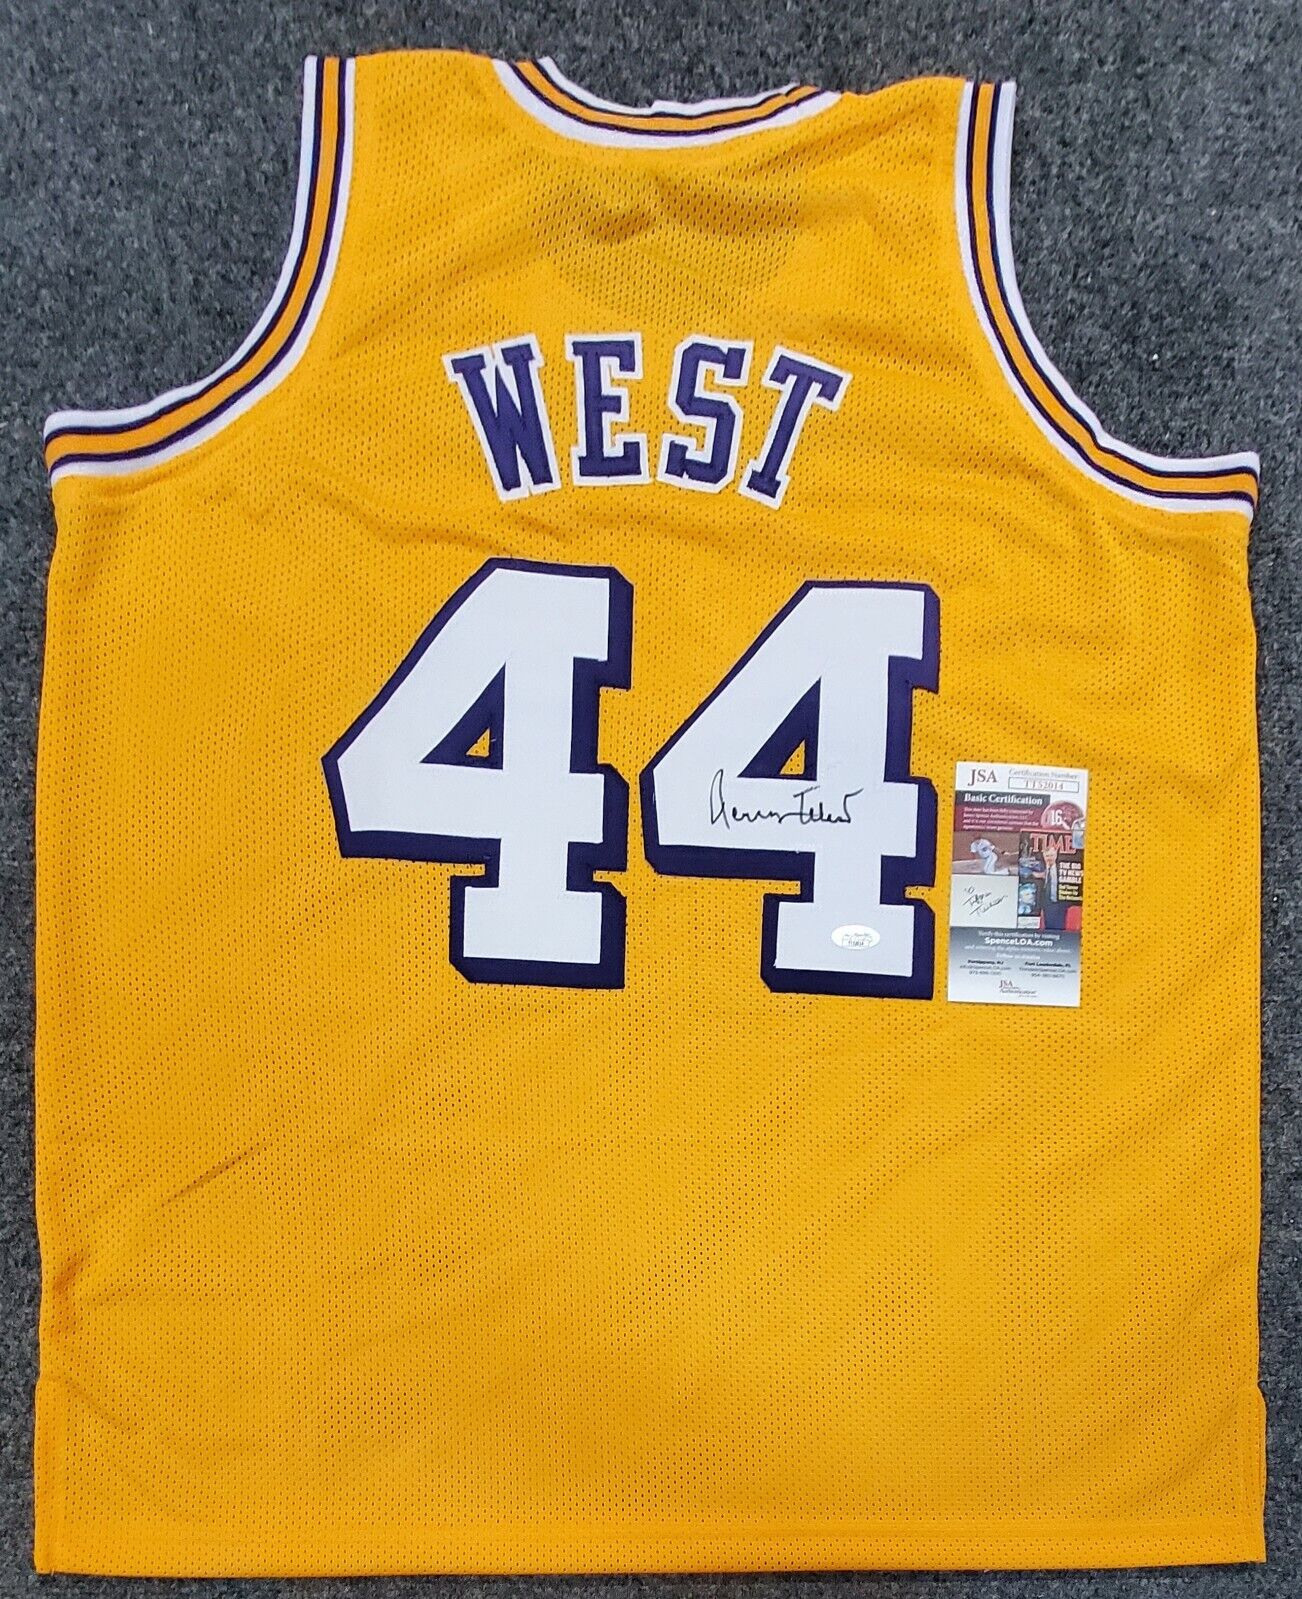 Jerry West Autographed Jersey